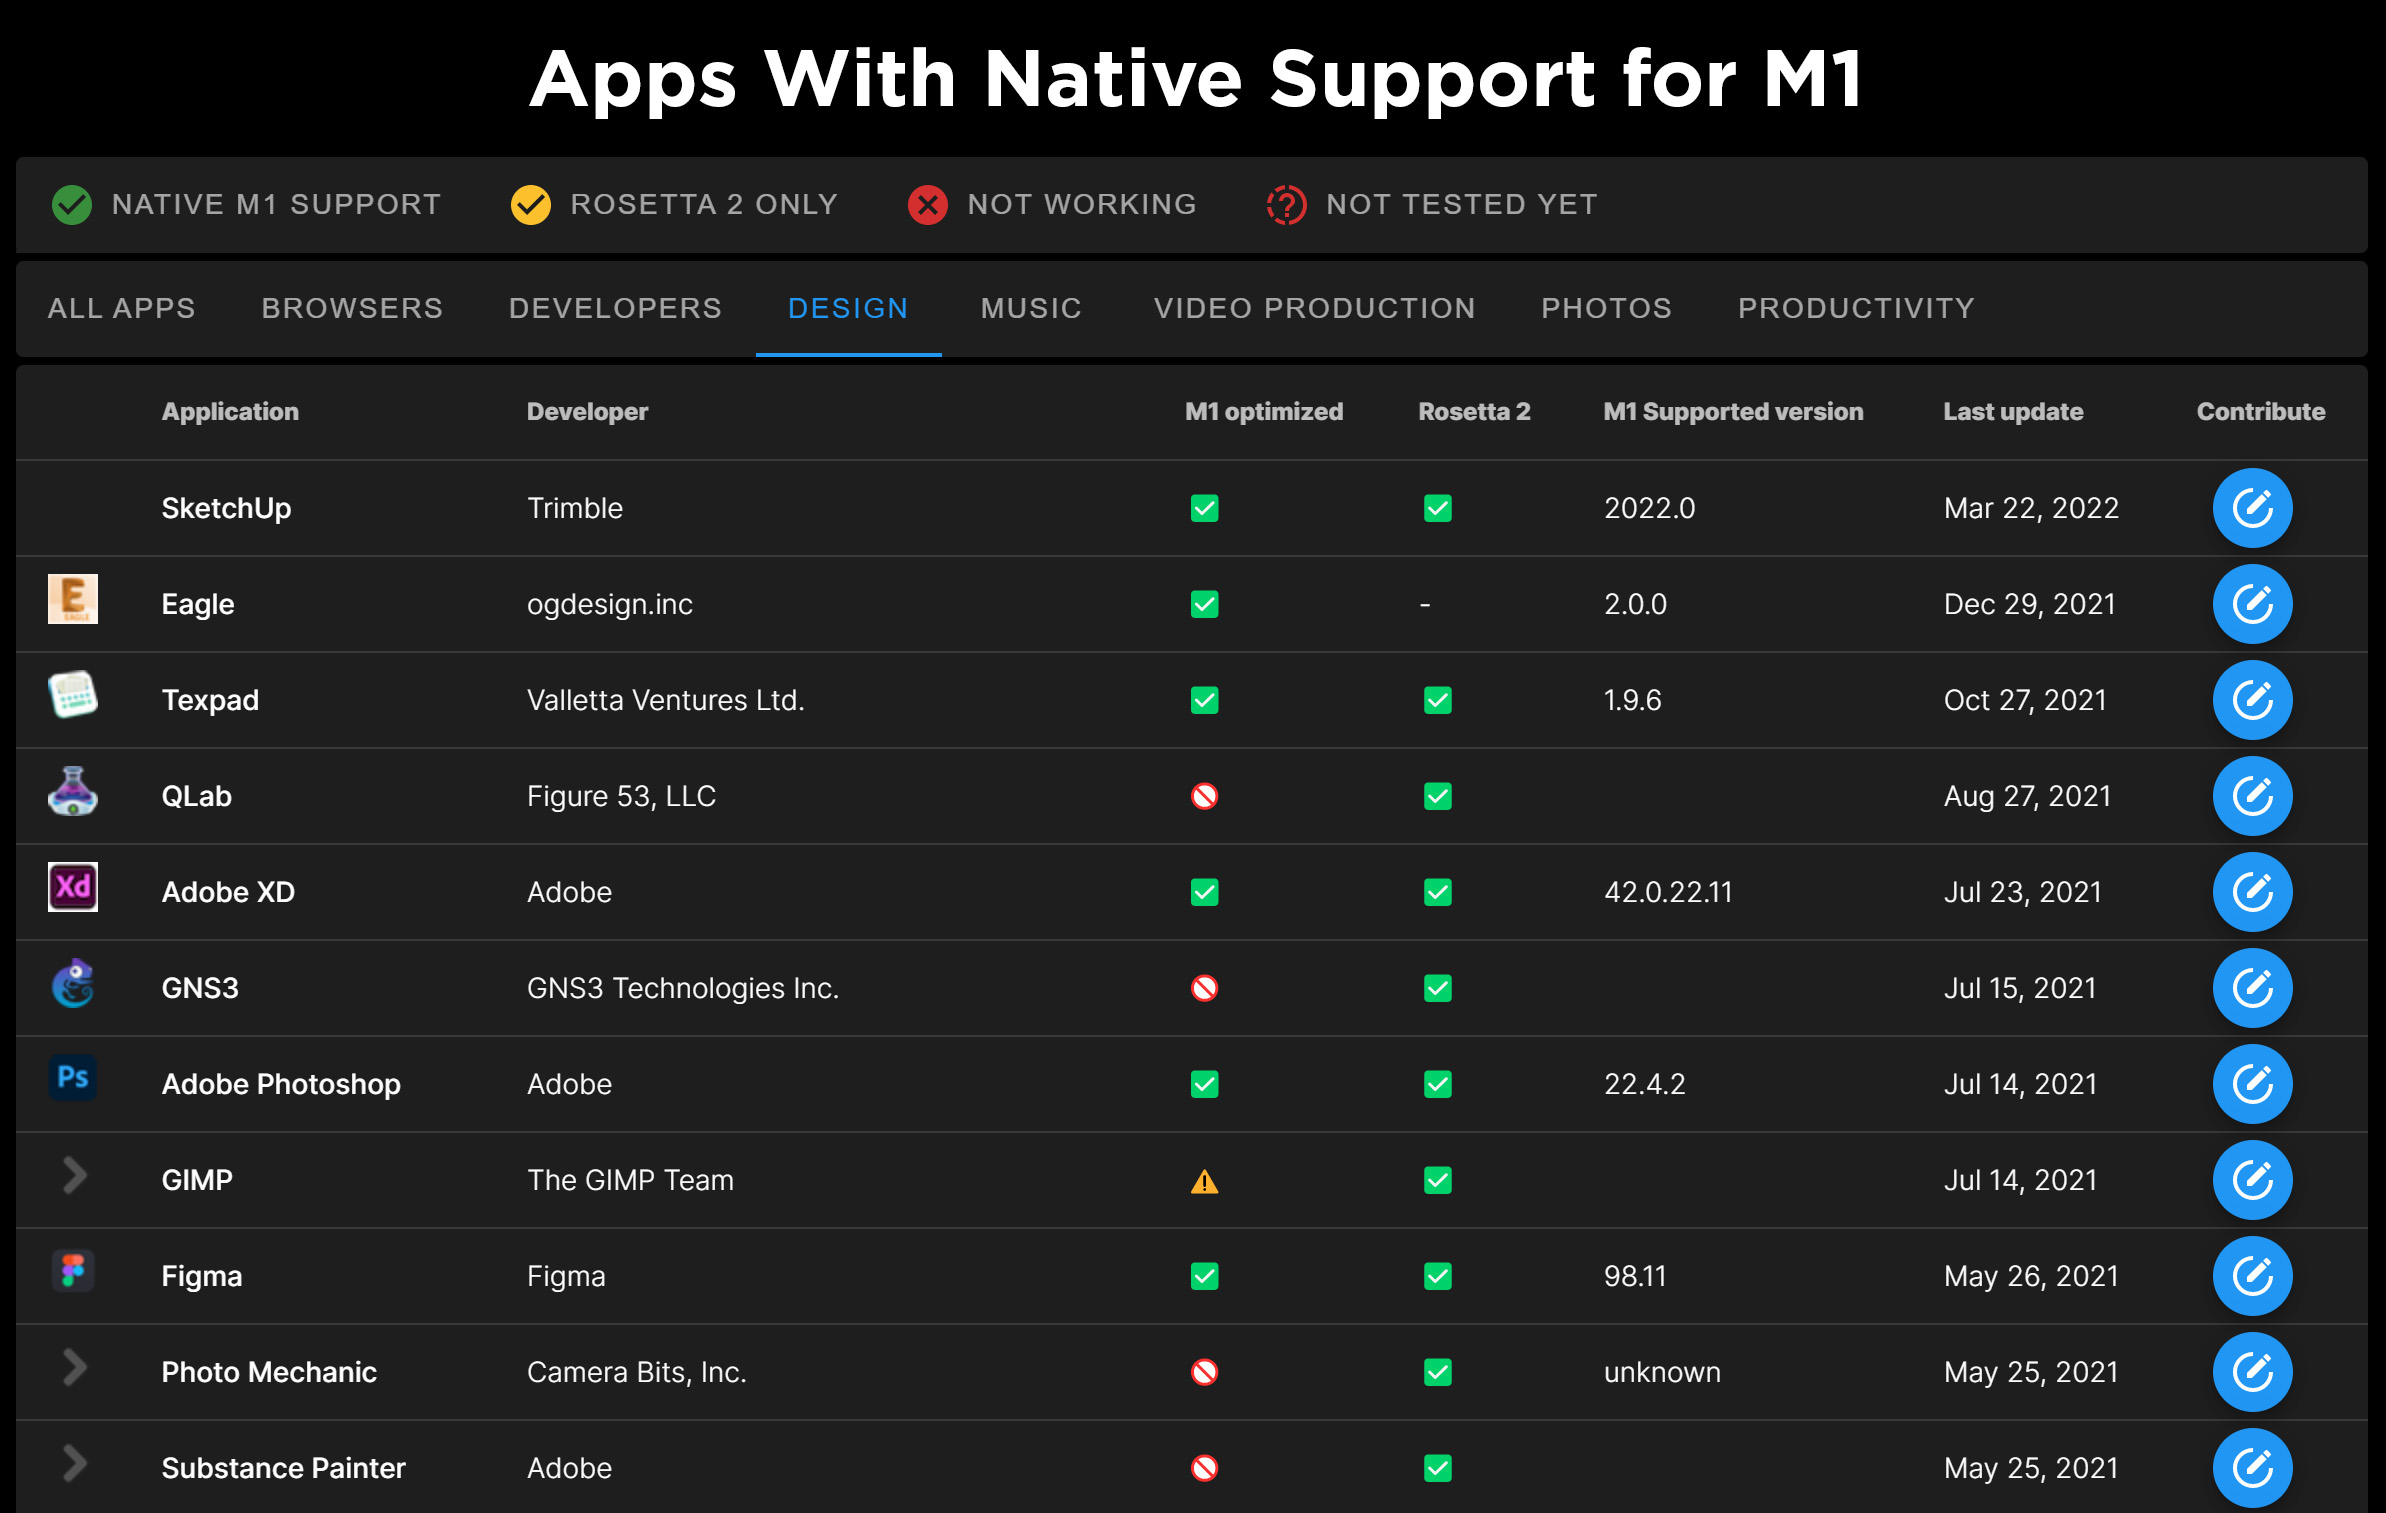 Apps With Native Support for M1